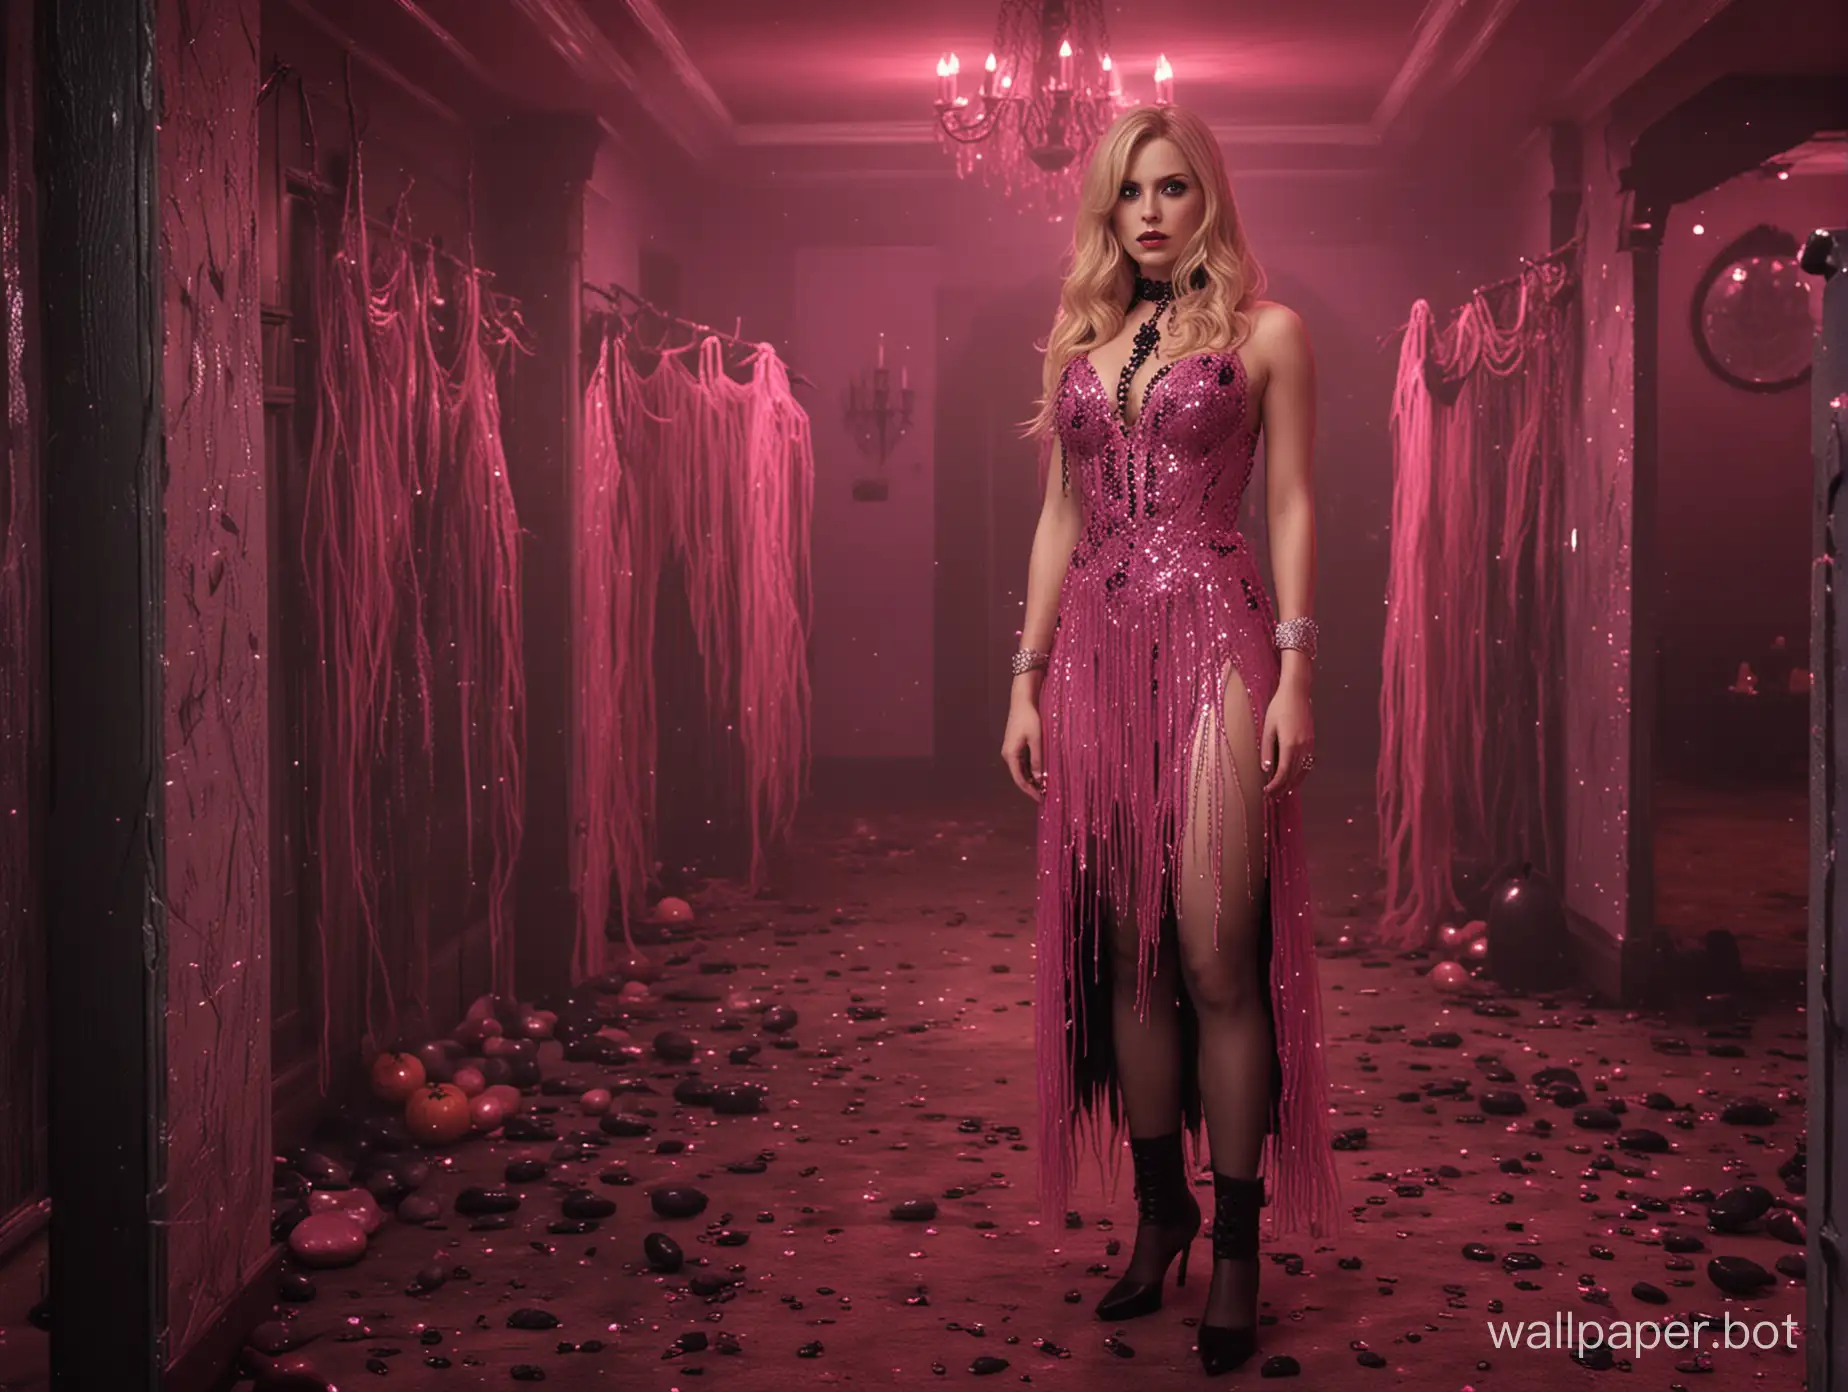 A mesmerizing 3D render of a 1990s WWE-inspired Halloween scene, featuring iconic wrestlers and a spooky atmosphere. Madison Montgomery from American Horror Story: Coven stands confidently in her enchanting pink and black attire adorned with metallic and sparkly stones. Beside her, the legendary Molly Holly exudes charisma in a matching pink and black outfit. The dimly lit setting, brought to life by the artistic vision of John Mossman, masterfully combines horror, vintage wrestling, and haunting Halloween elements. This breathtaking cinematic painting is a stunning blend of nostalgia, vibrant colors, and eerie charm that captures the essence of the Halloween spirit., 3d render, vibrant, cinematic, painting